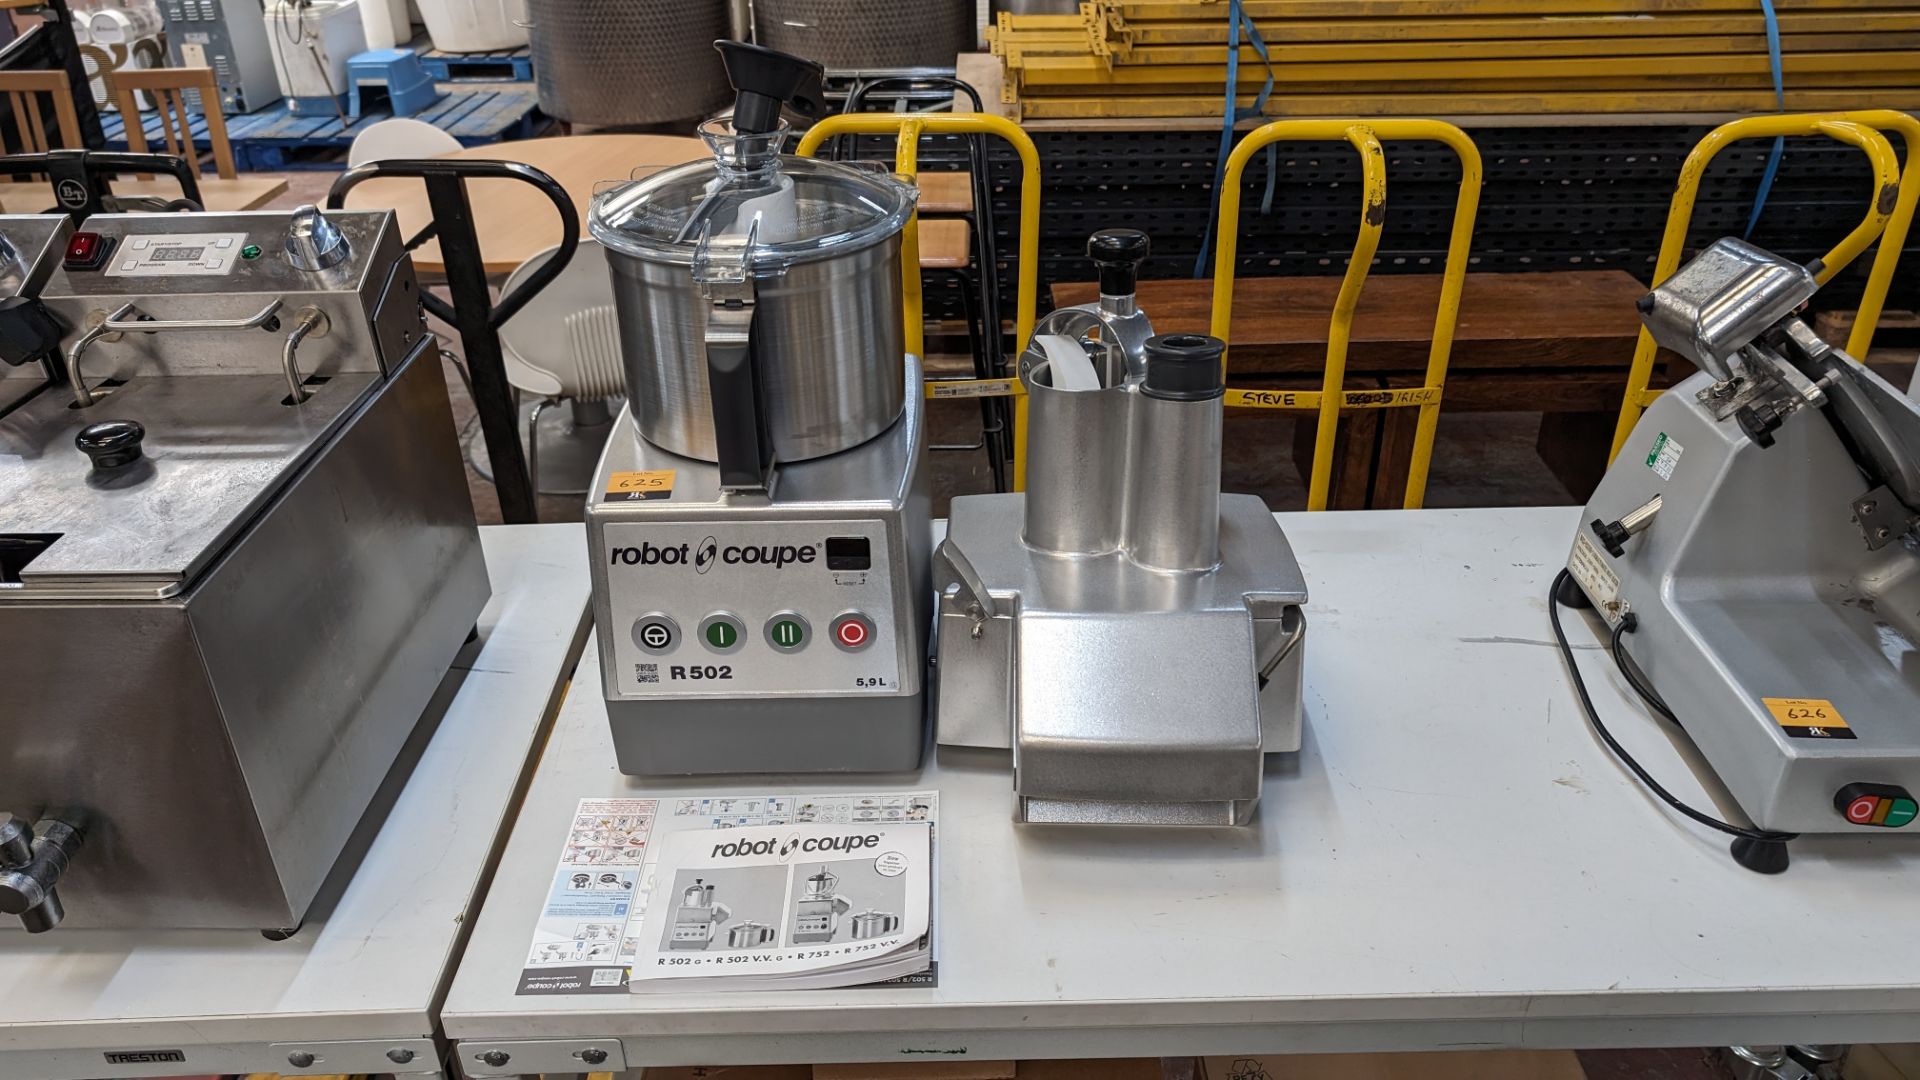 Robot Coupe model R502 5.9L commercial food processor plus vegetable processor attachment. Both the - Image 2 of 10